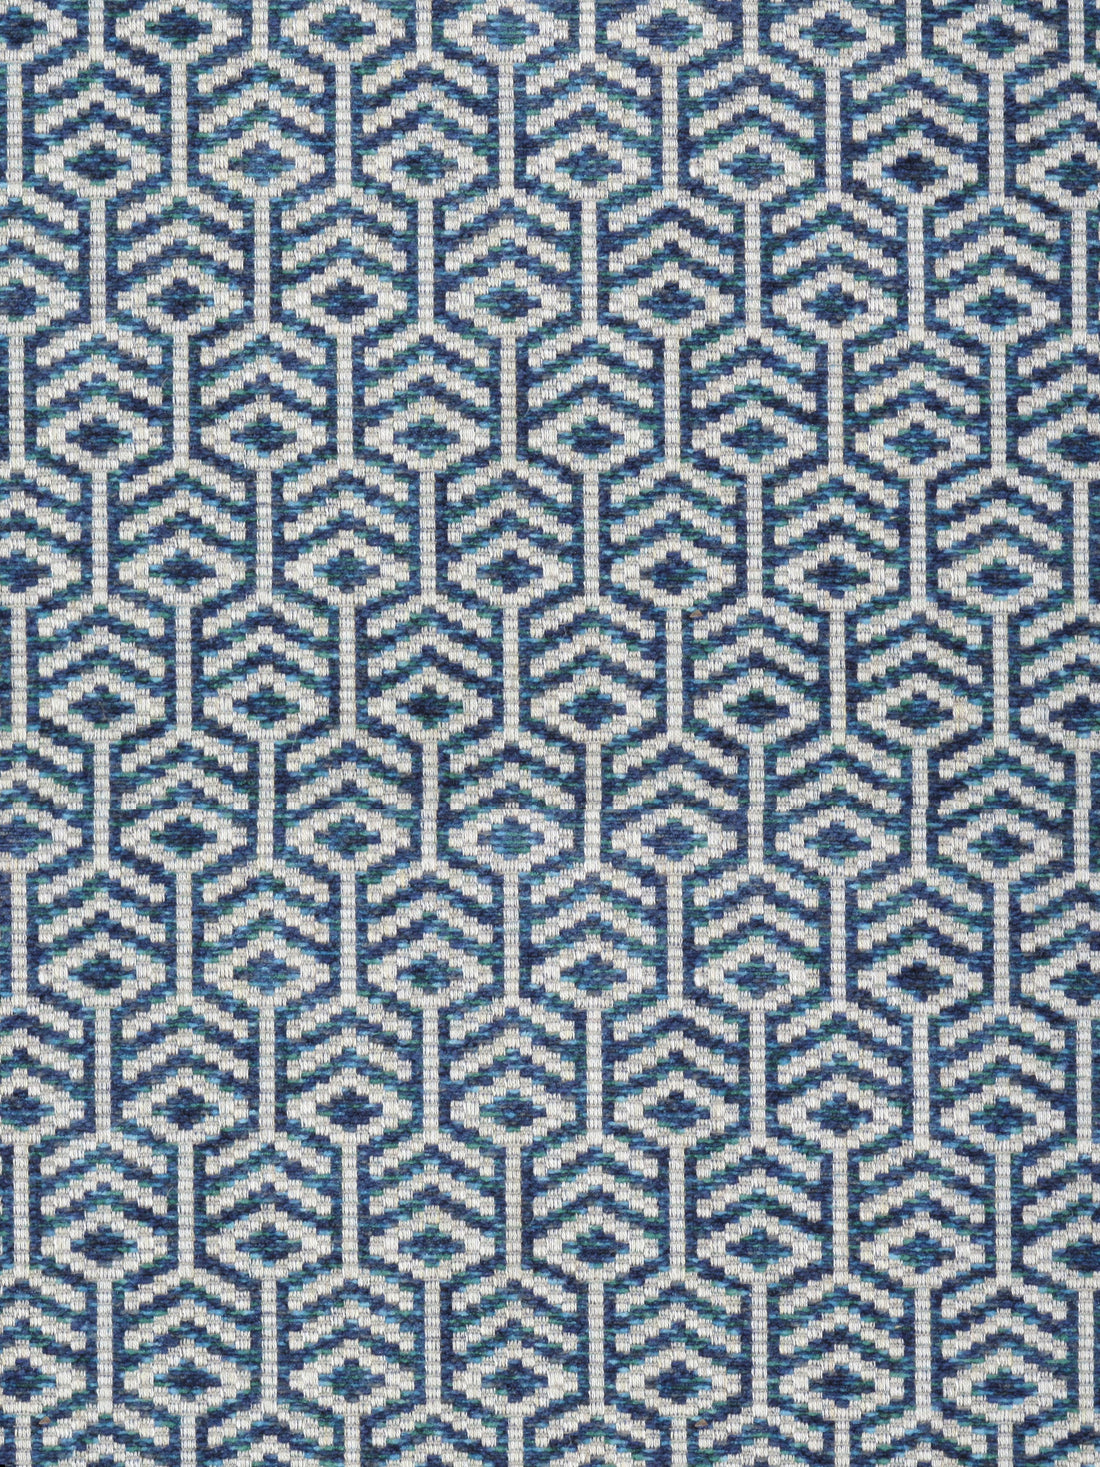 Axial fabric in peacock color - pattern number FO 00061417 - by Scalamandre in the Old World Weavers collection